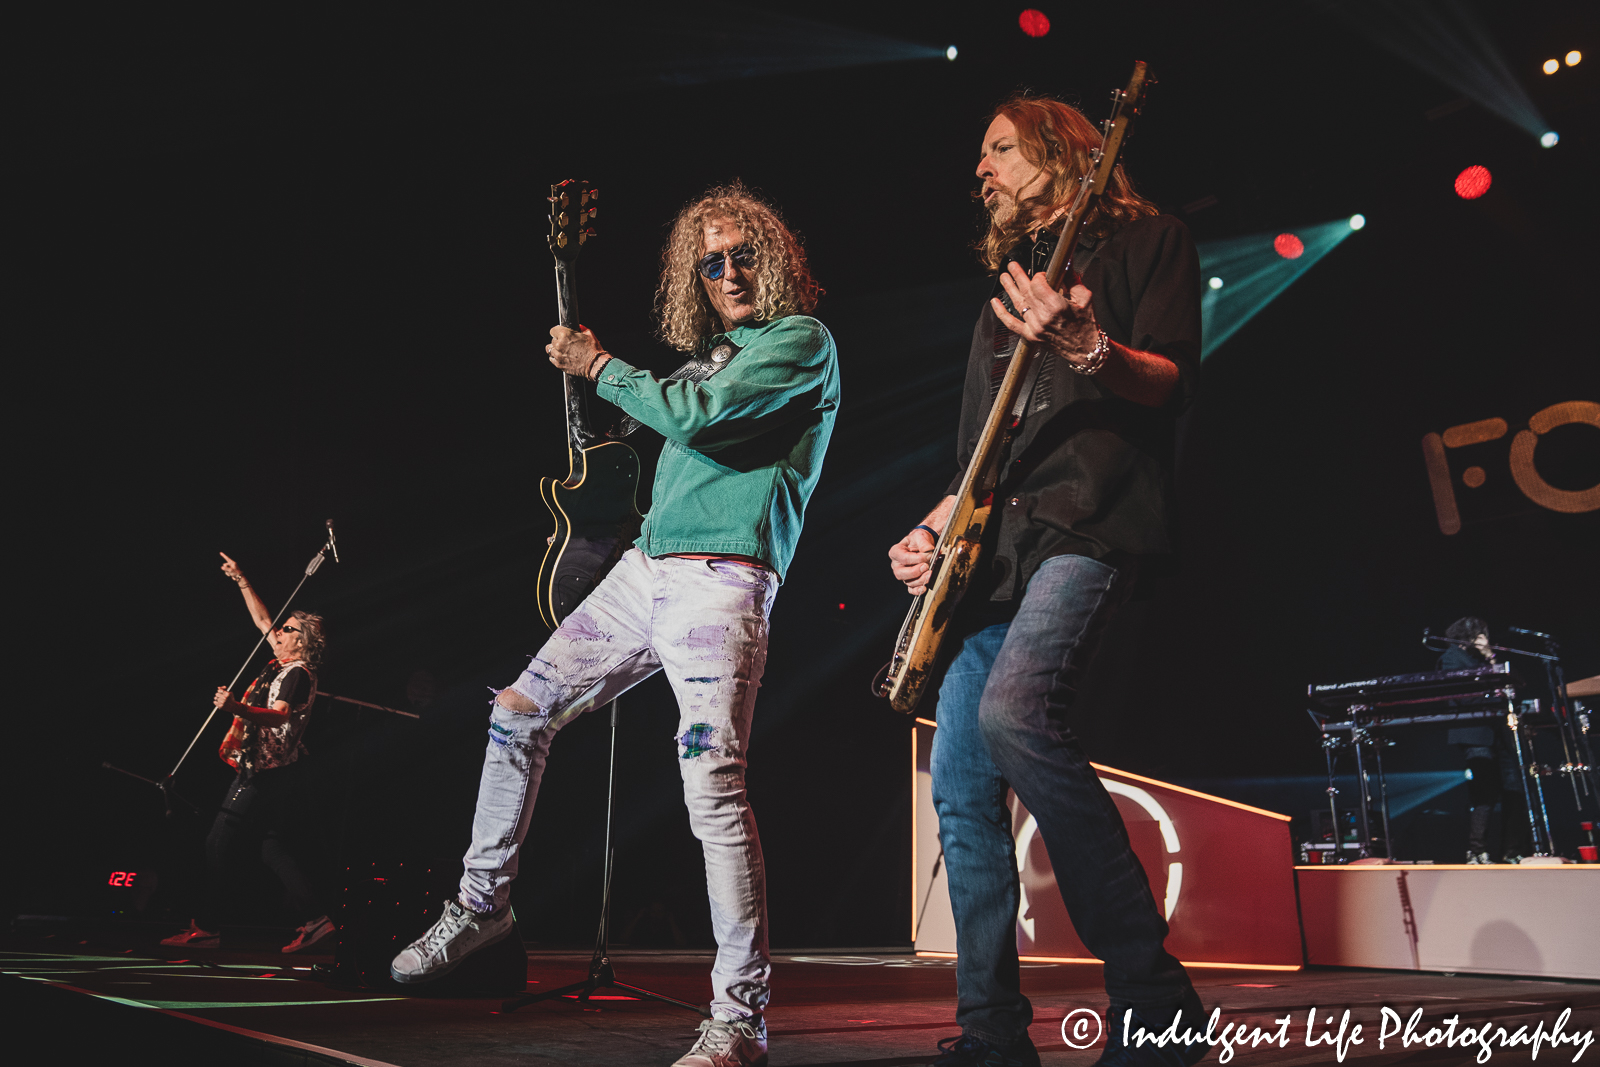 Foreigner guitarist Bruce Watson and bass player Jeff Pilson dazzling fans as they took to the stage at Hartman Arena in Park City, KS on April 30, 2023.